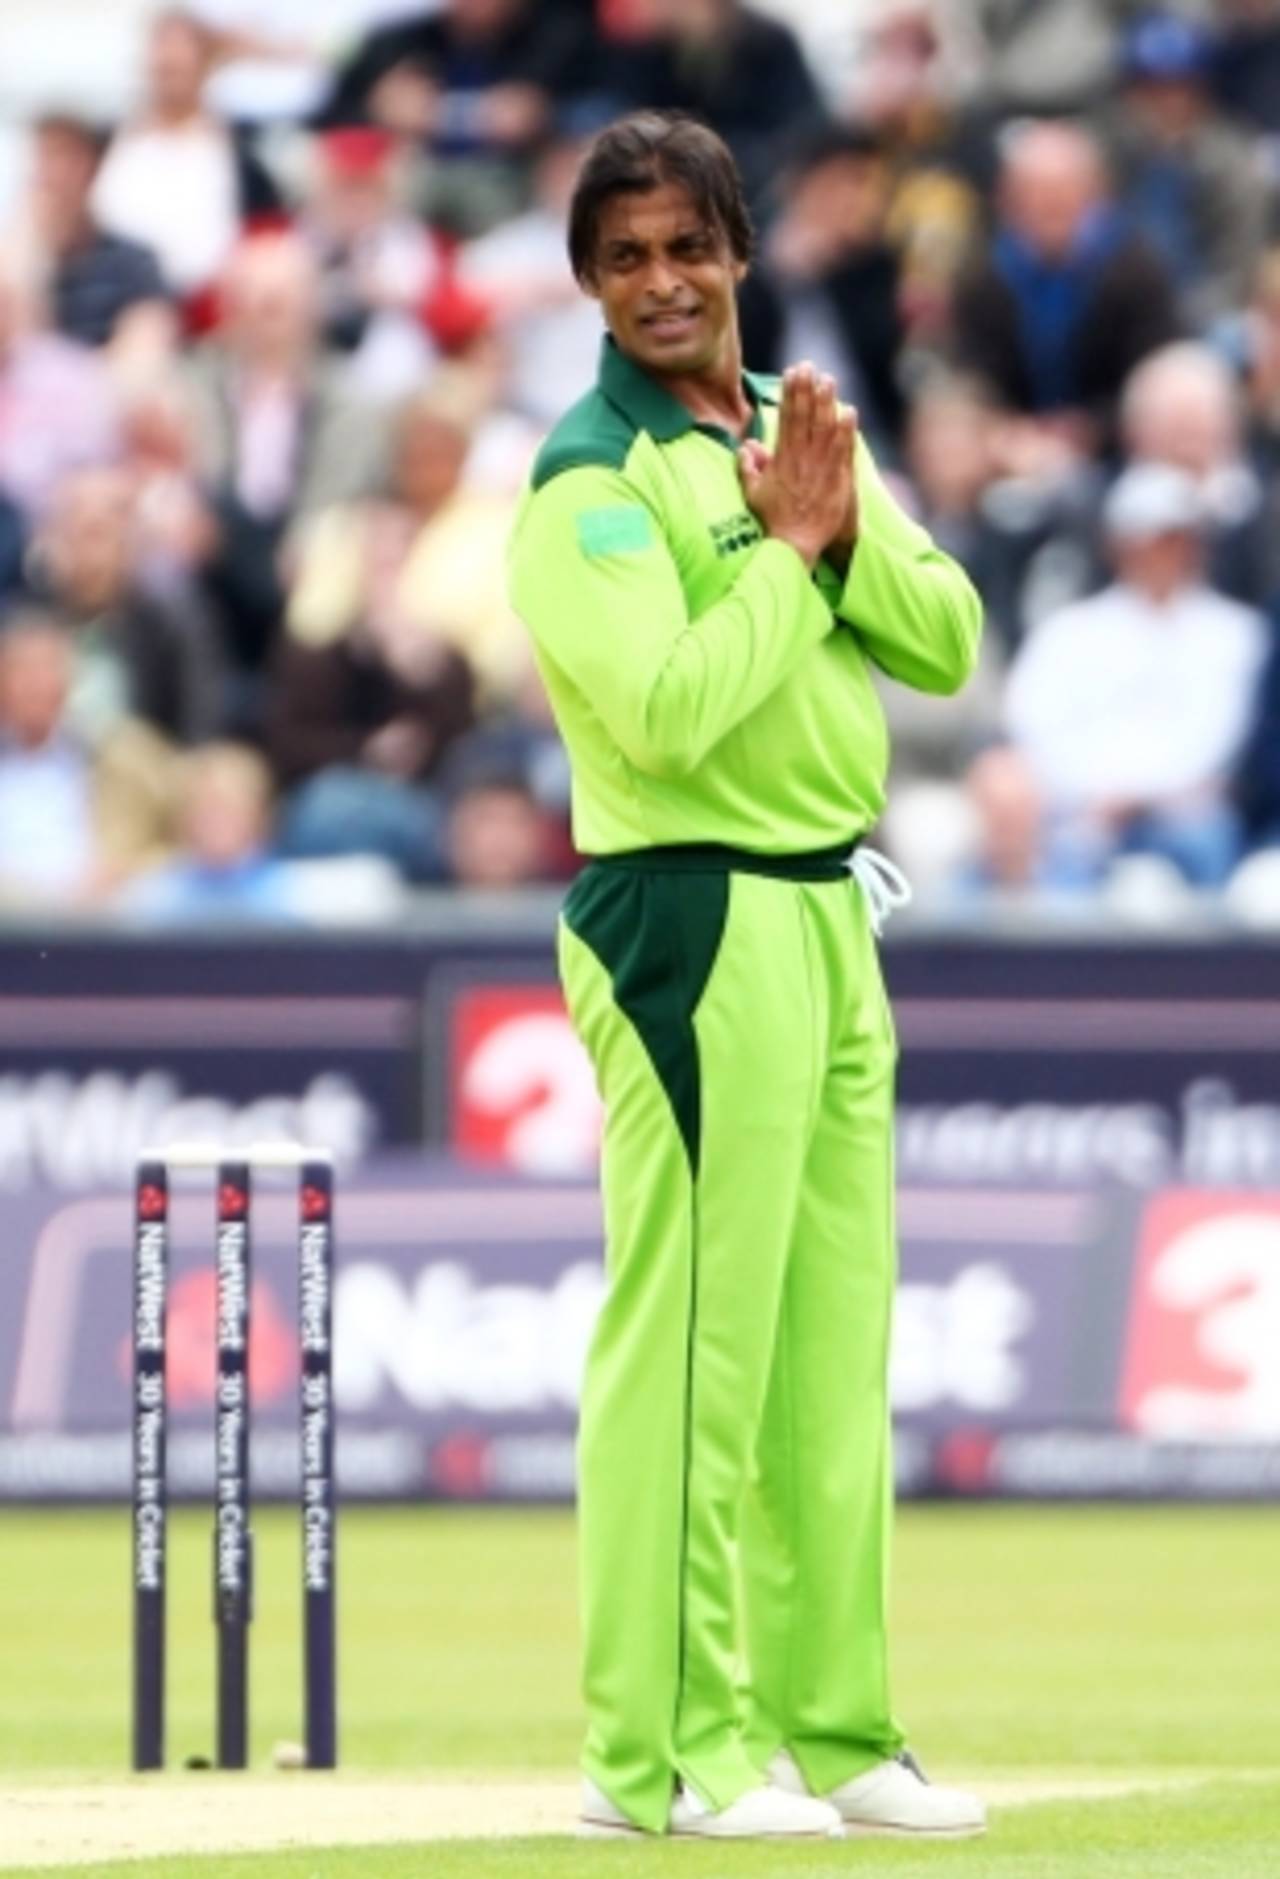 Shoaib Akhtar bowled an excellent opening spell and was unlucky not to pick up a wicket, England v Pakistan, 1st ODI, Chester-le-Street, September 10 2010 